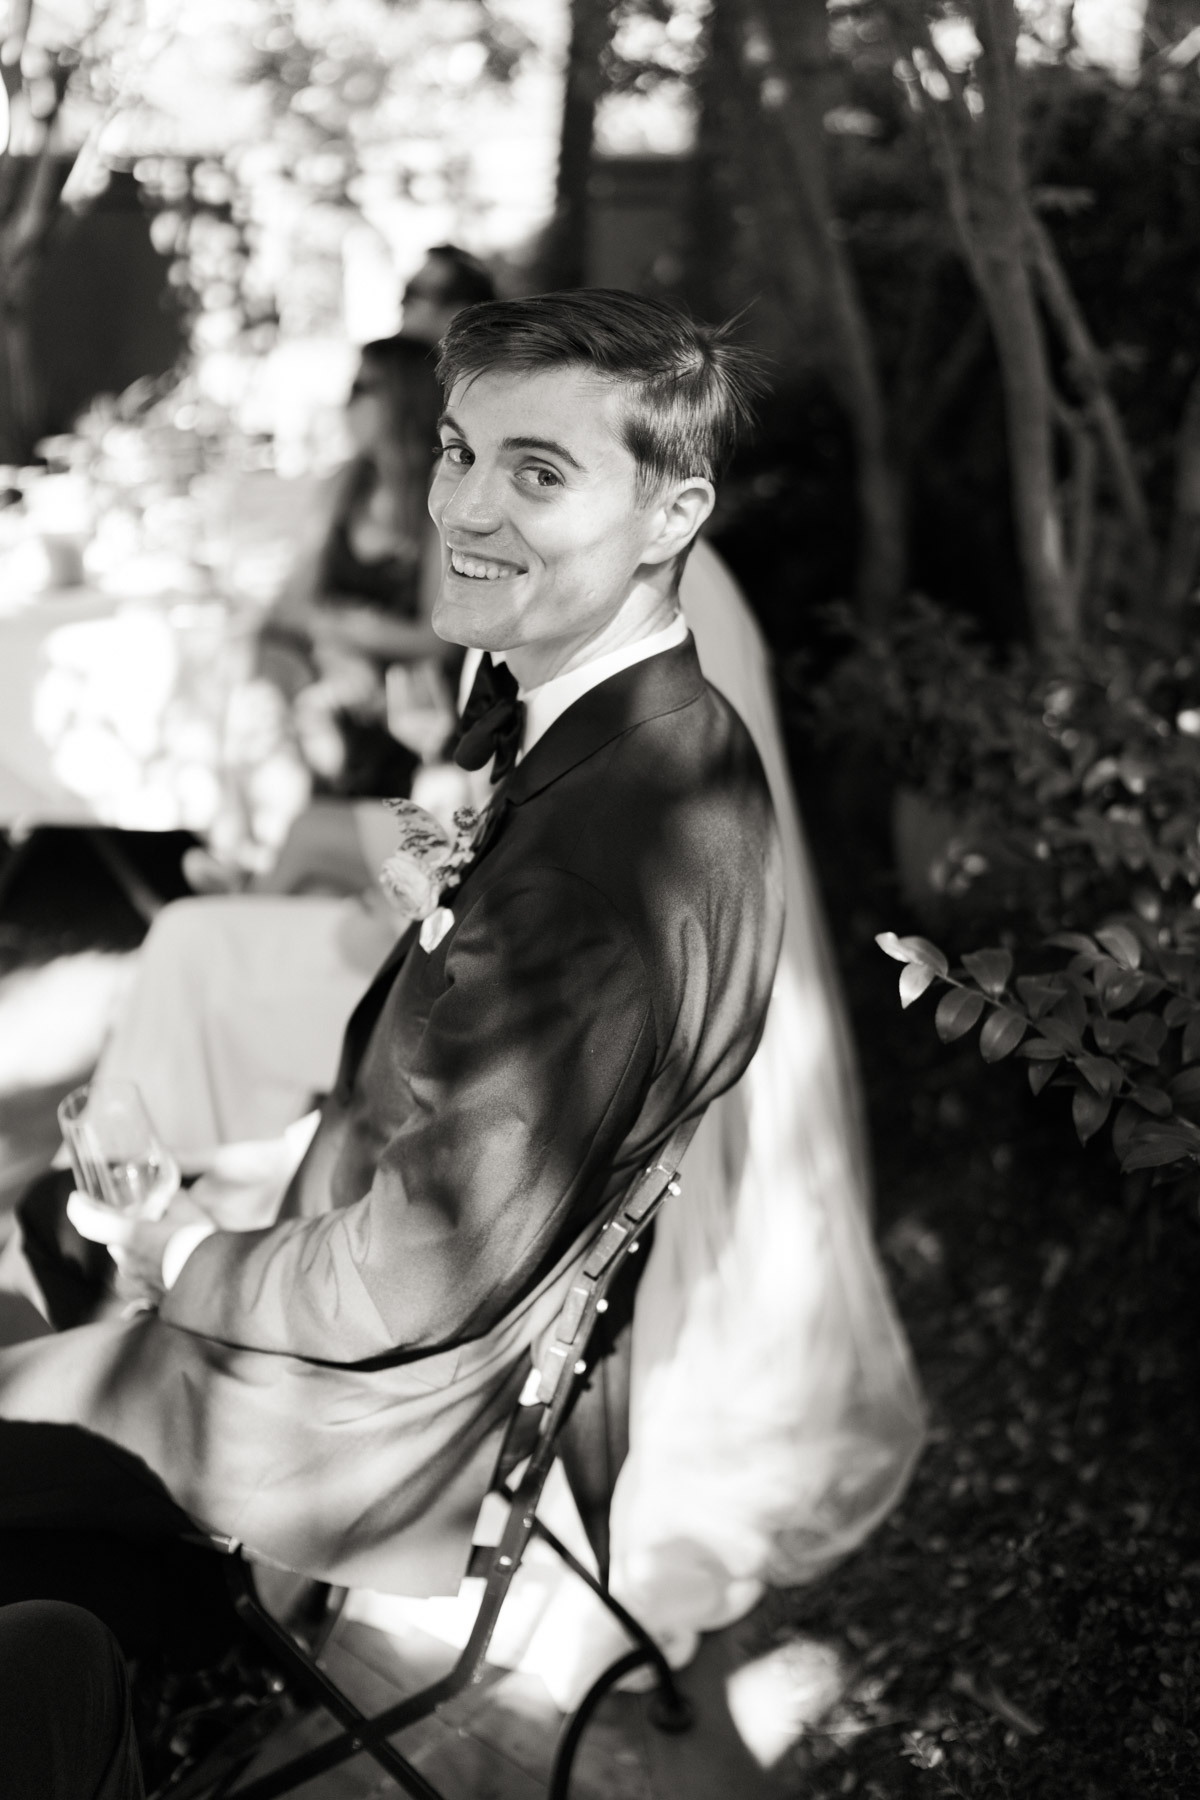 A groom smiles at the photographer in a candid moment during cocktail hour